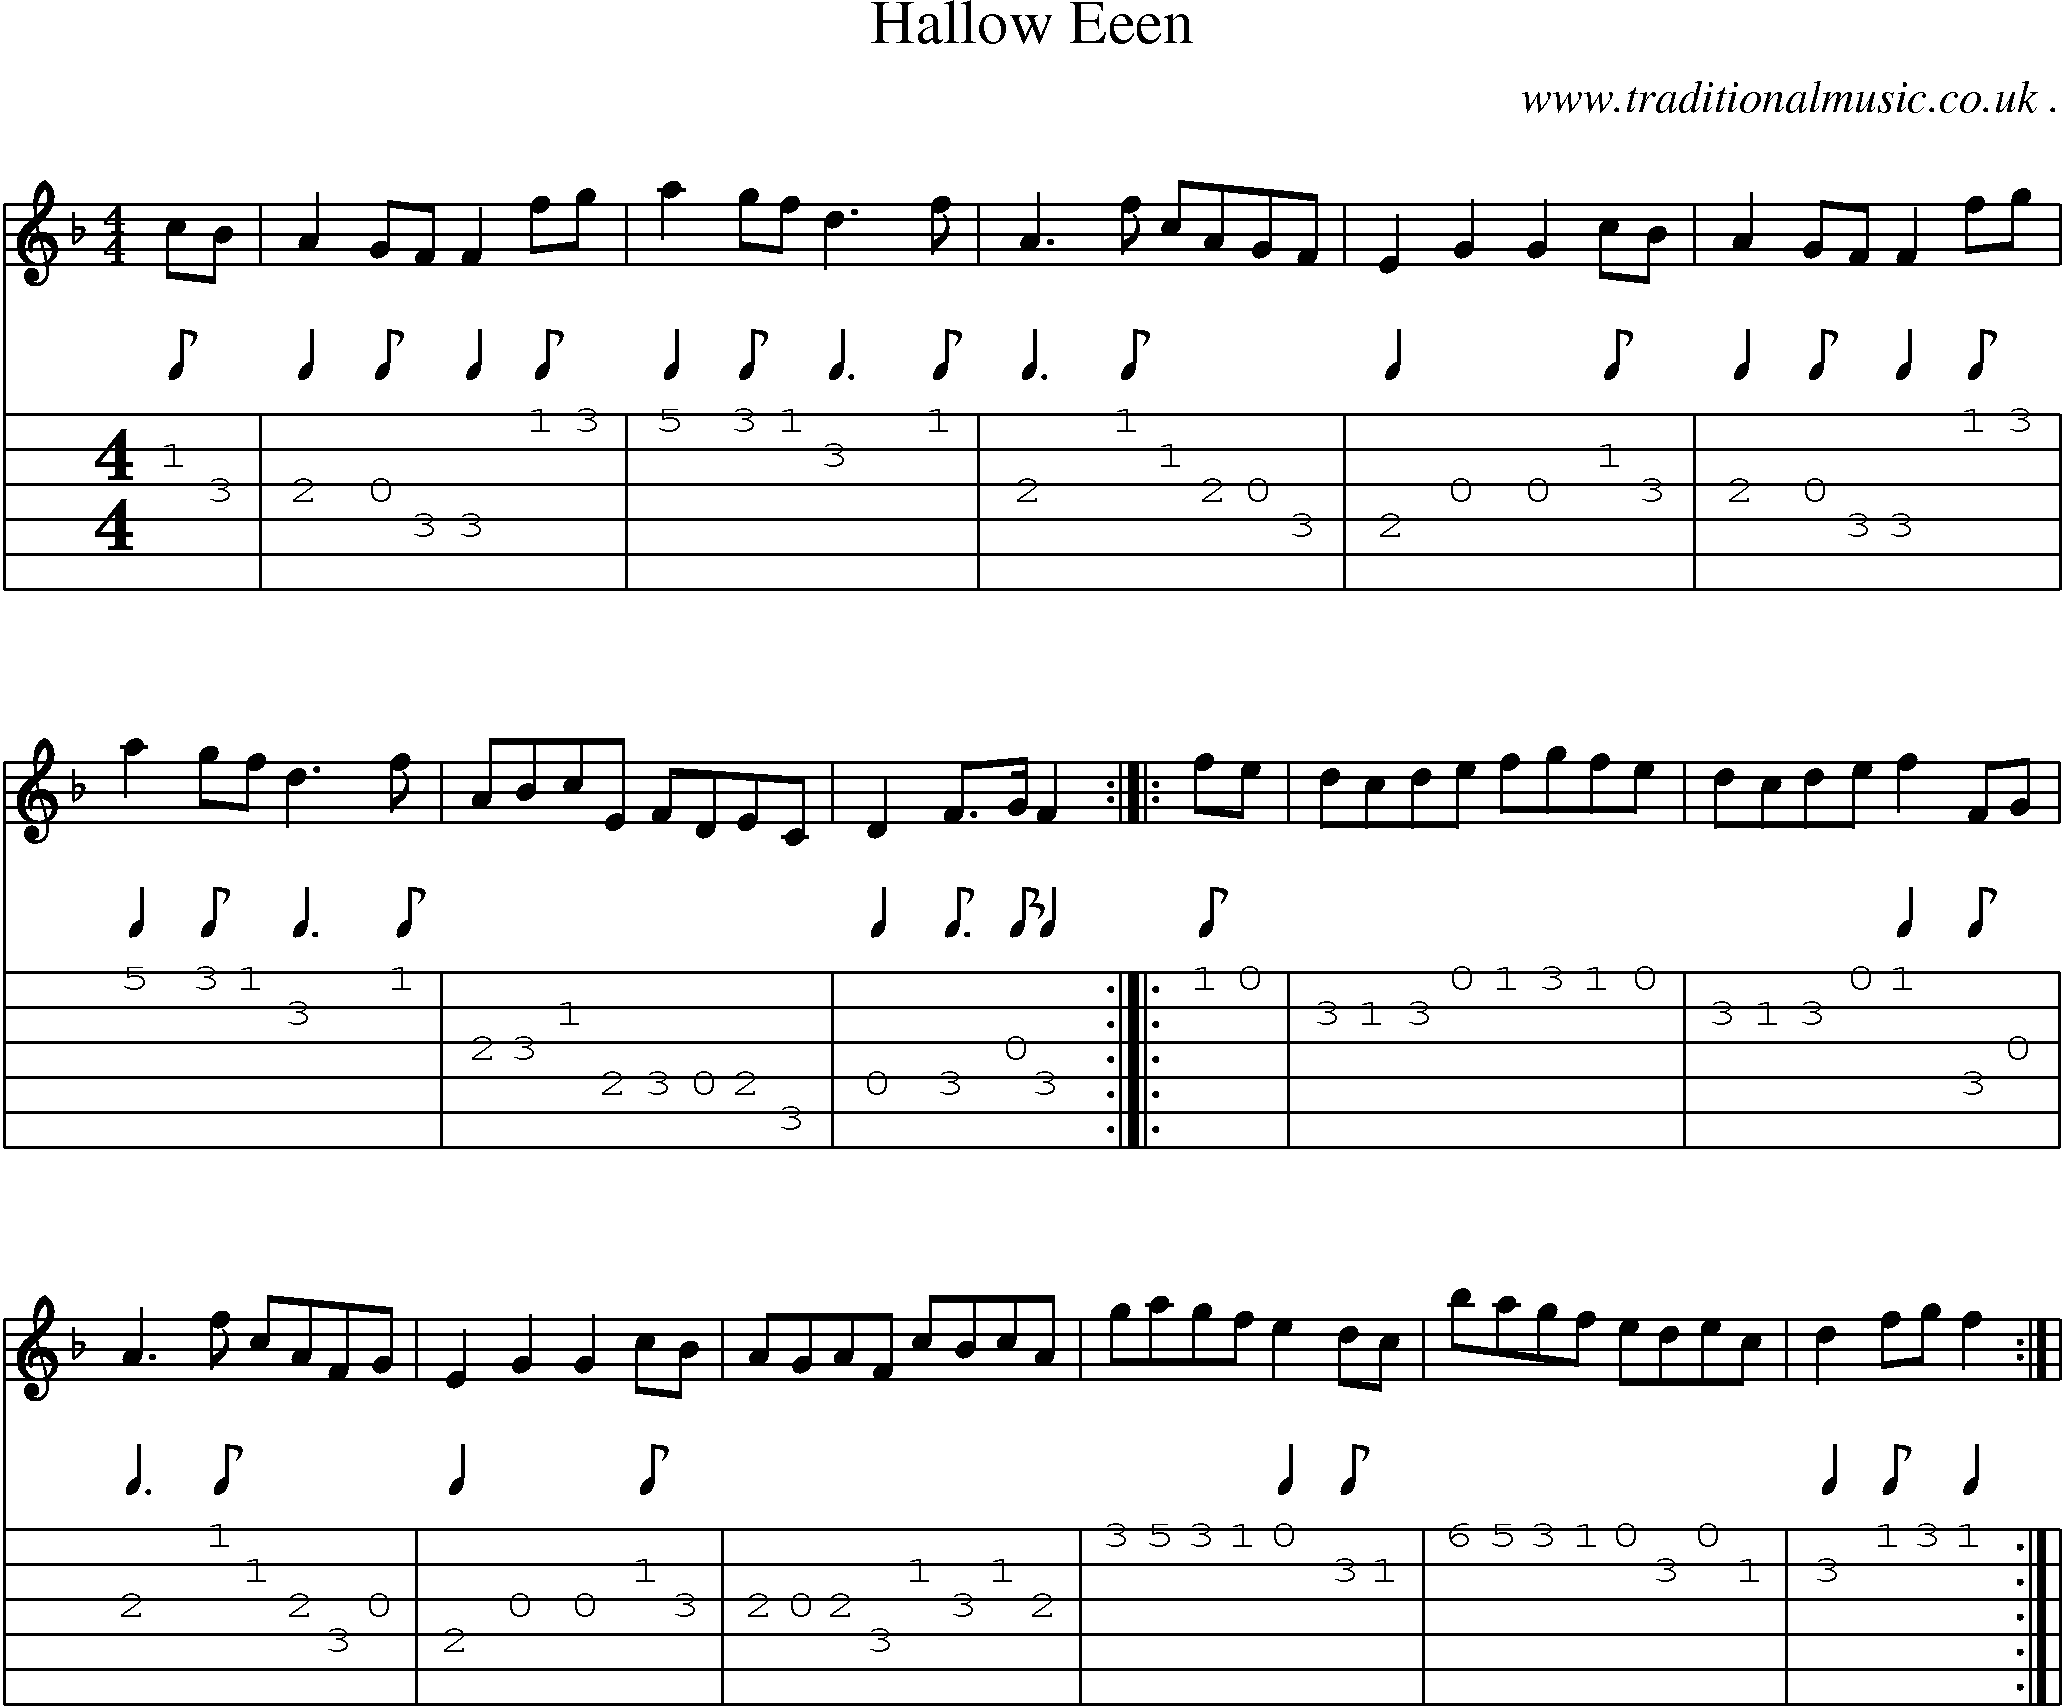 Sheet-Music and Guitar Tabs for Hallow Eeen